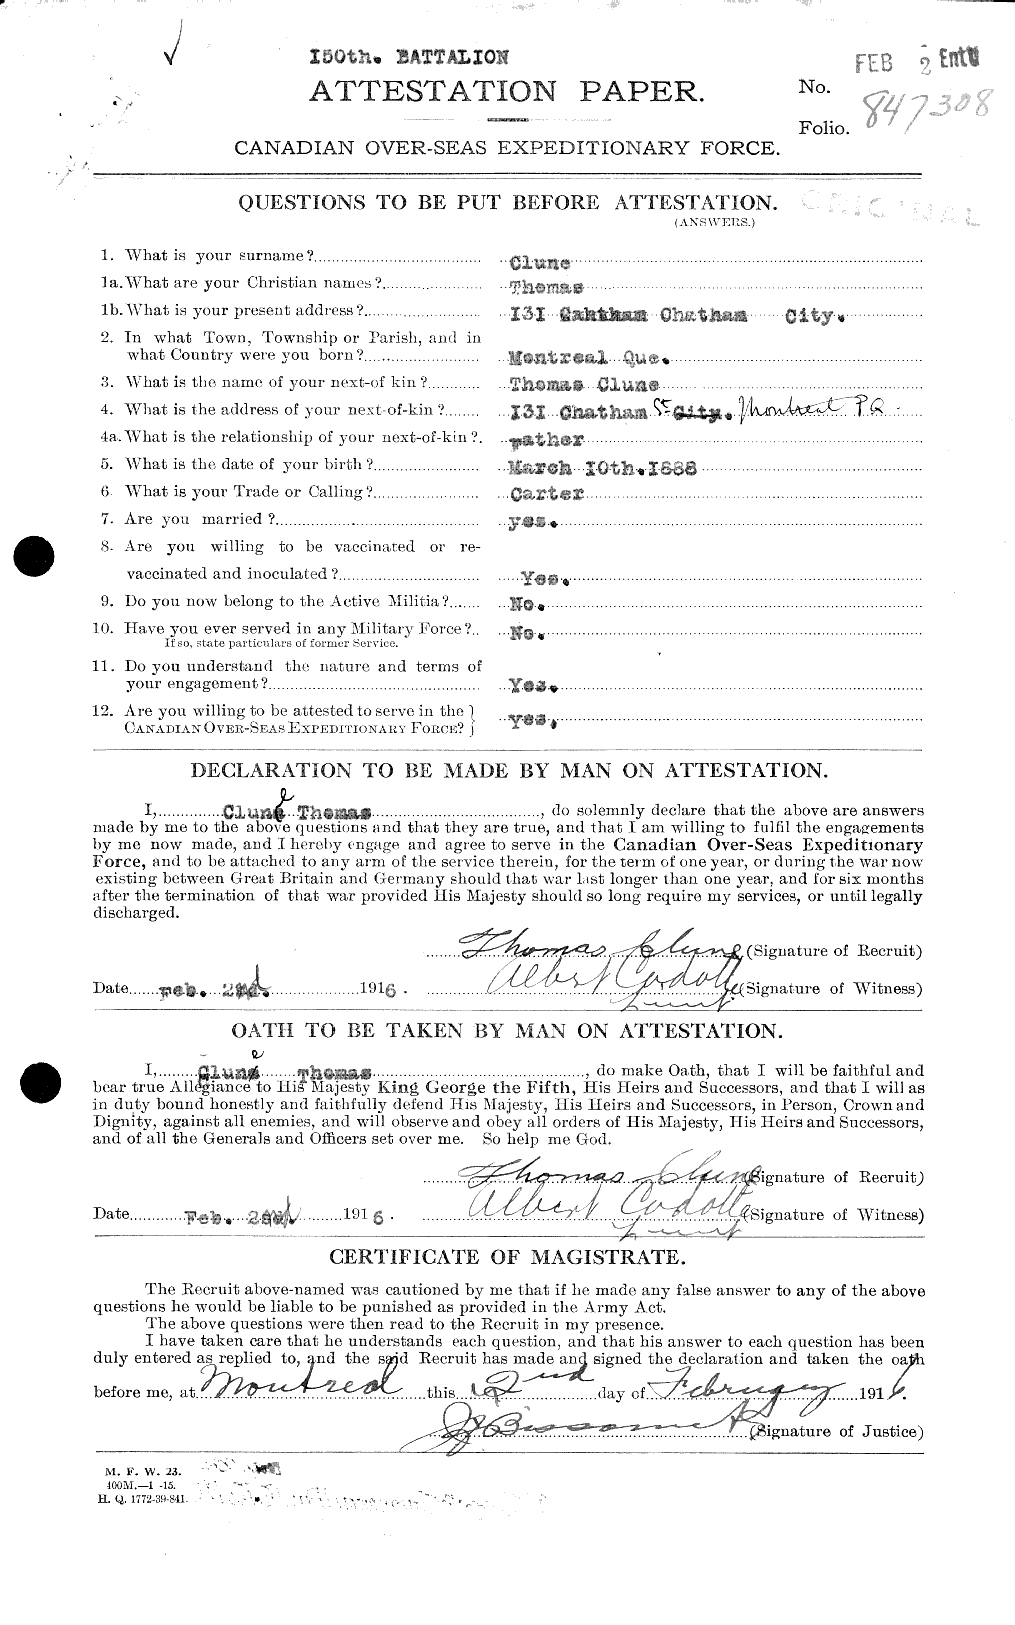 Personnel Records of the First World War - CEF 029214a